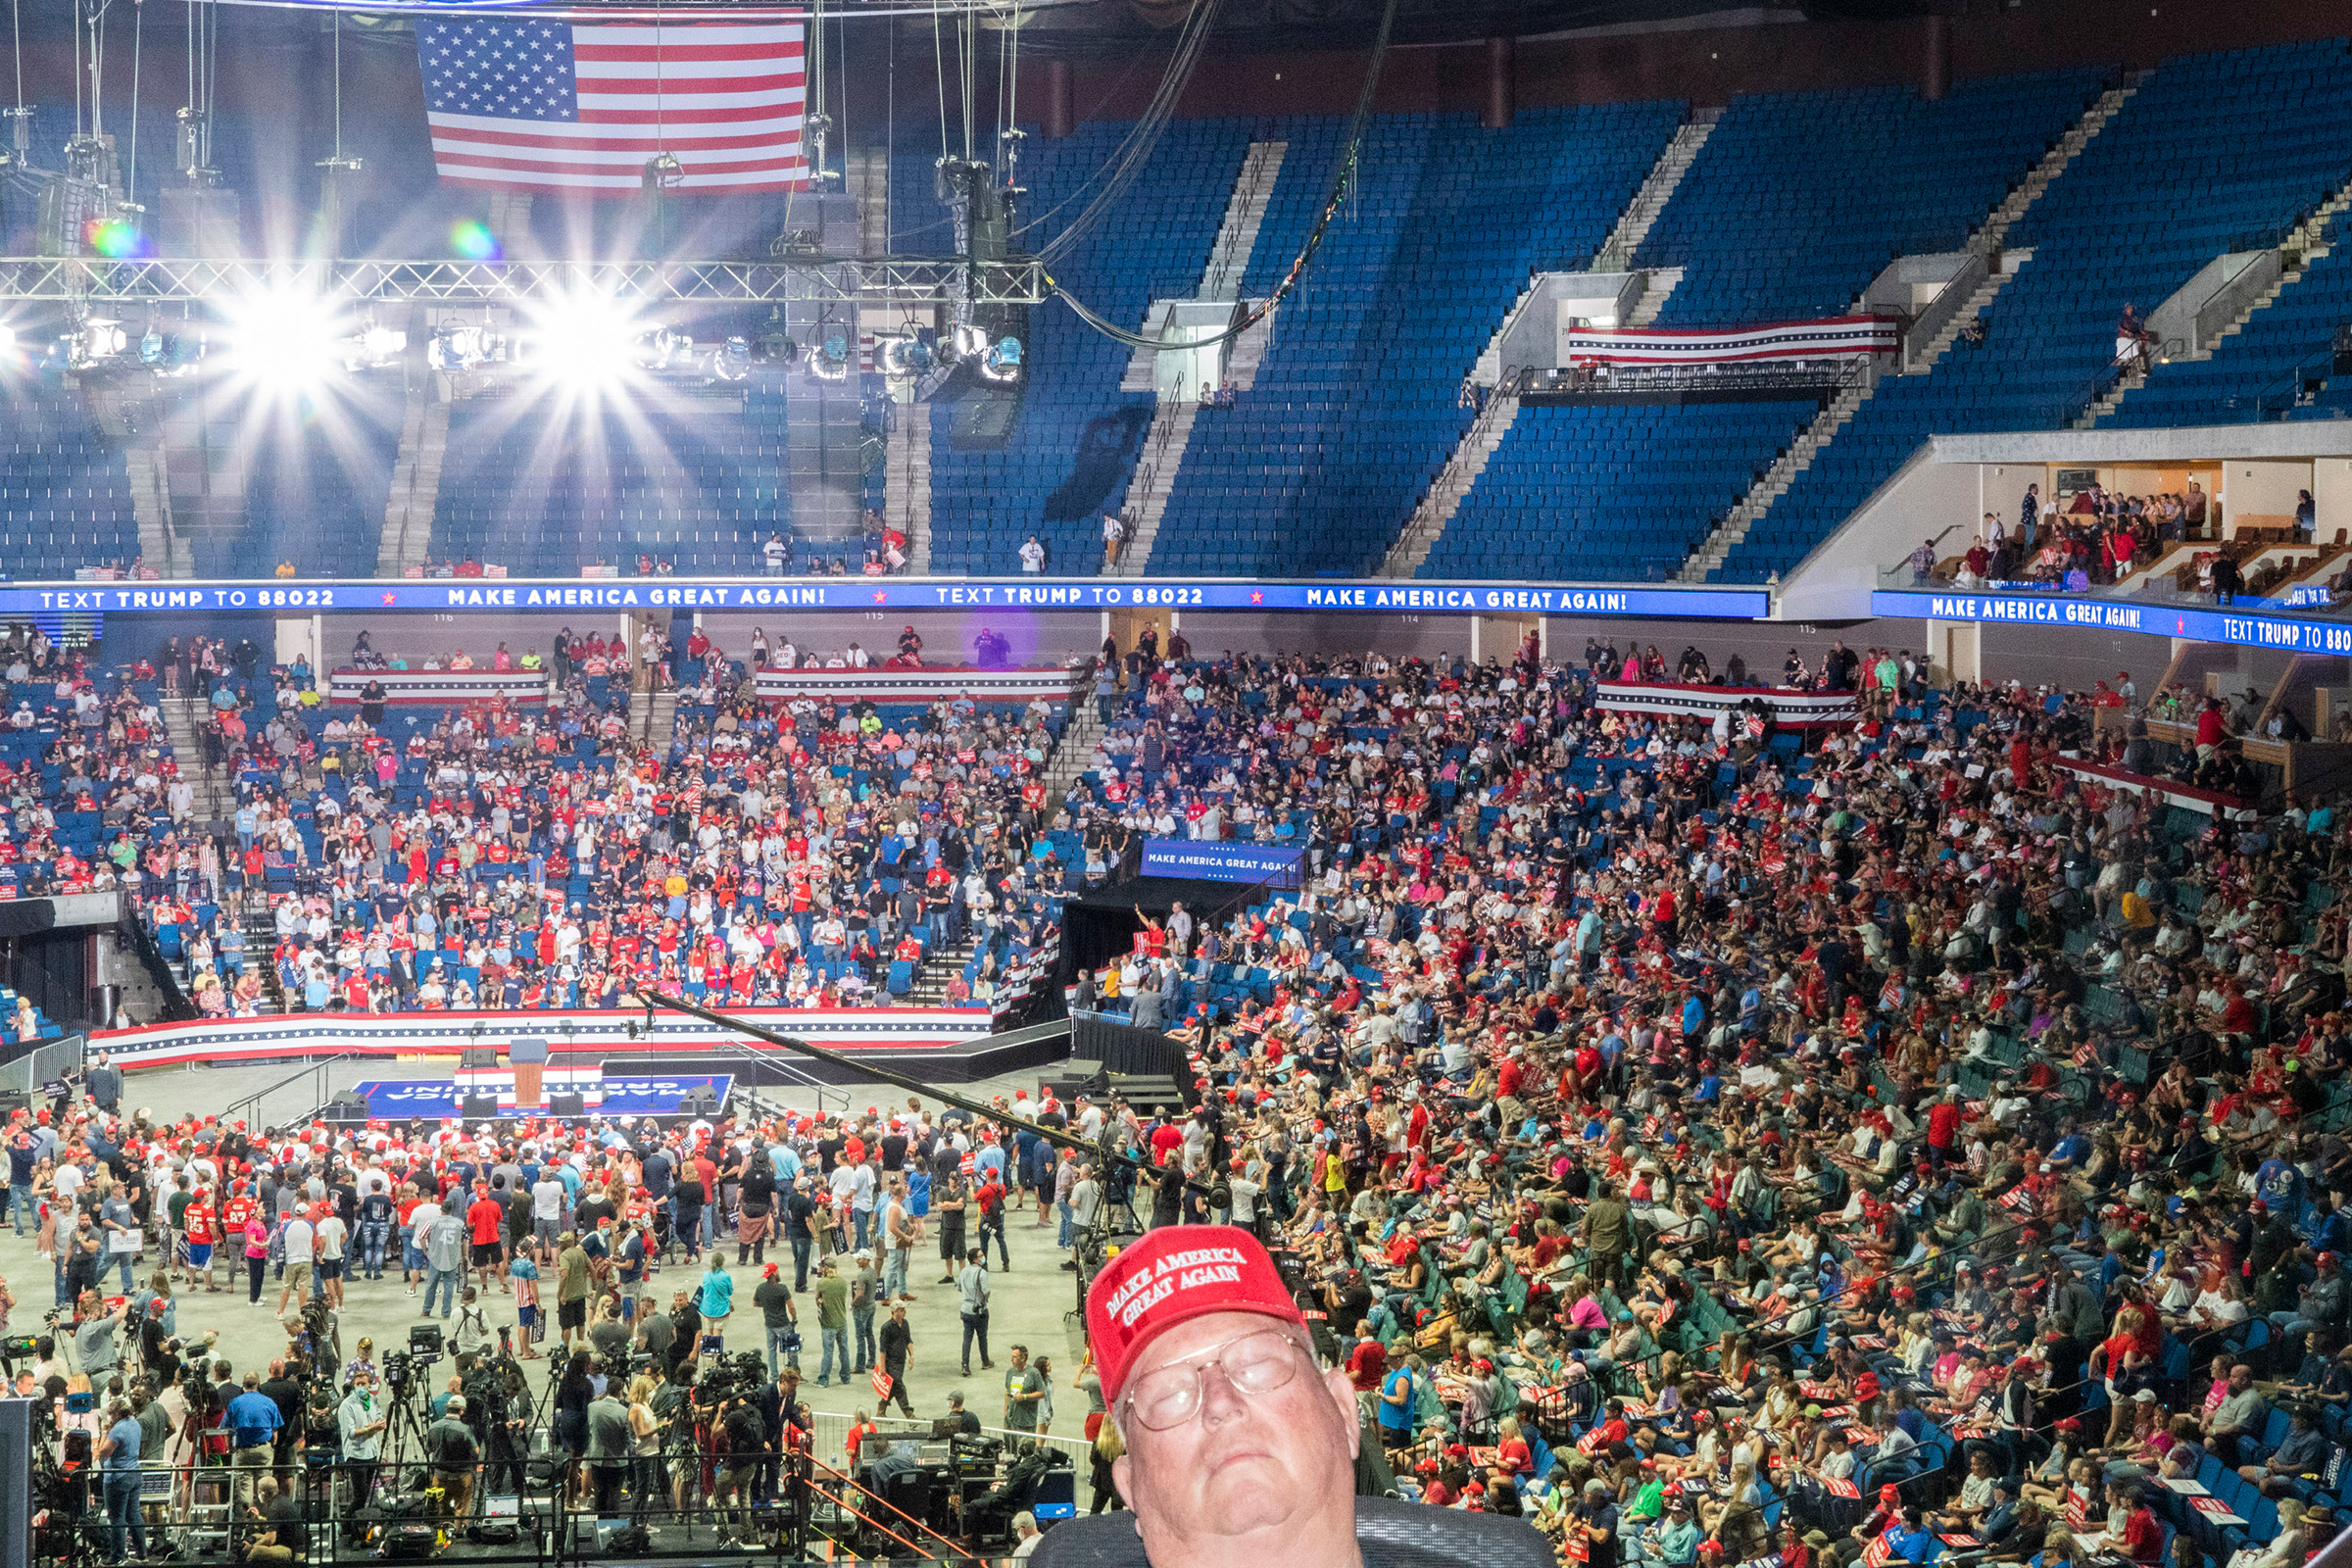 Rally attendees wait for President Trump to arrive at the BOK Center in Tulsa, Okla., on June 20, 2020. It was Trump's first campaign rally in months since the COVID-19 pandemic began in the U.S.